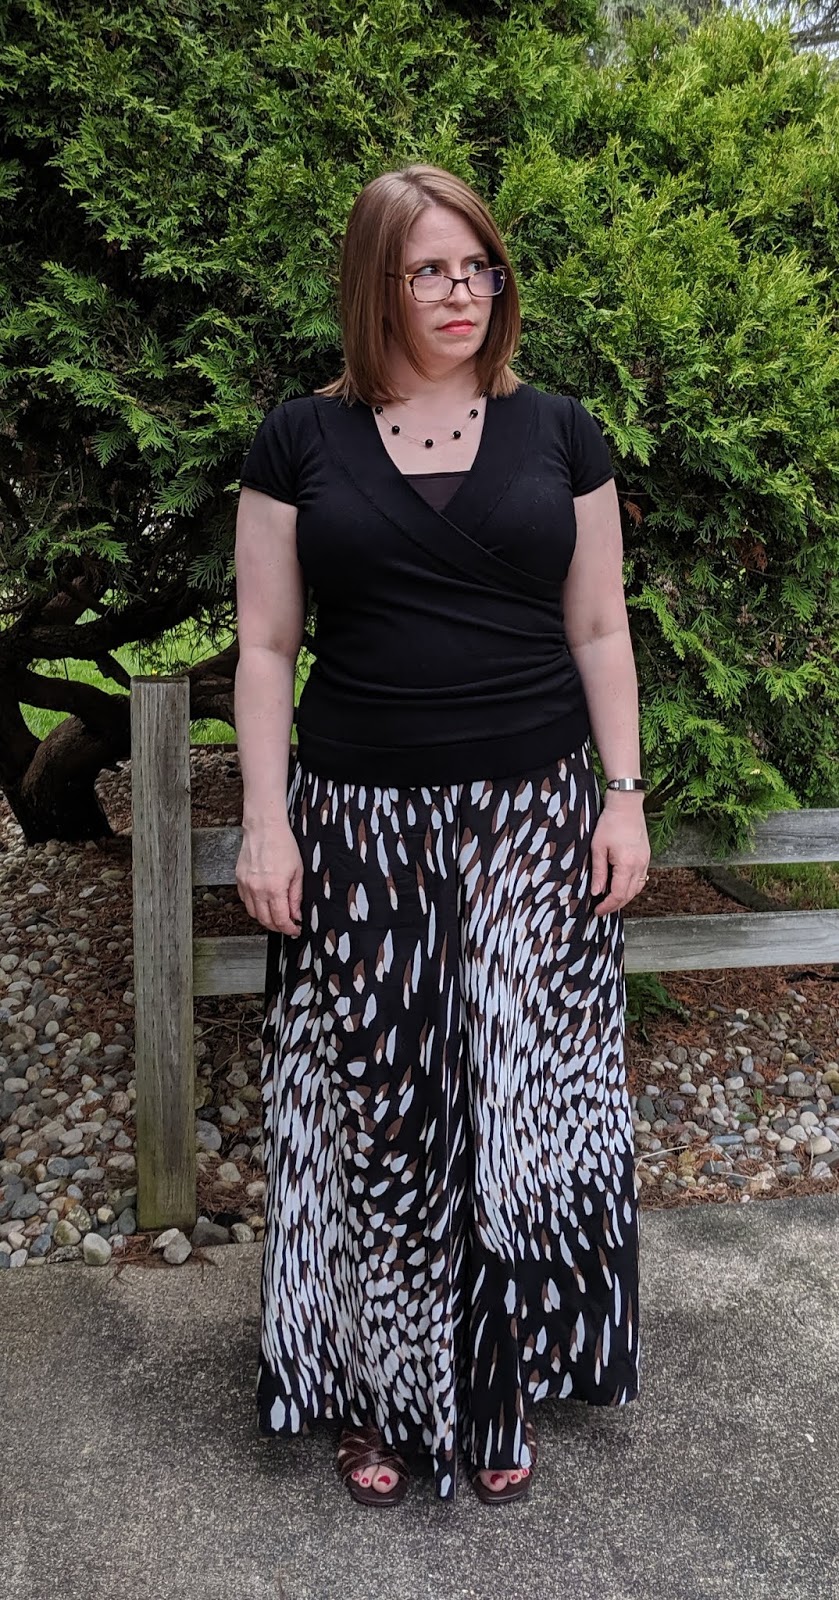 Samara Pants From Itch to Stitch: The Fun Of Something New